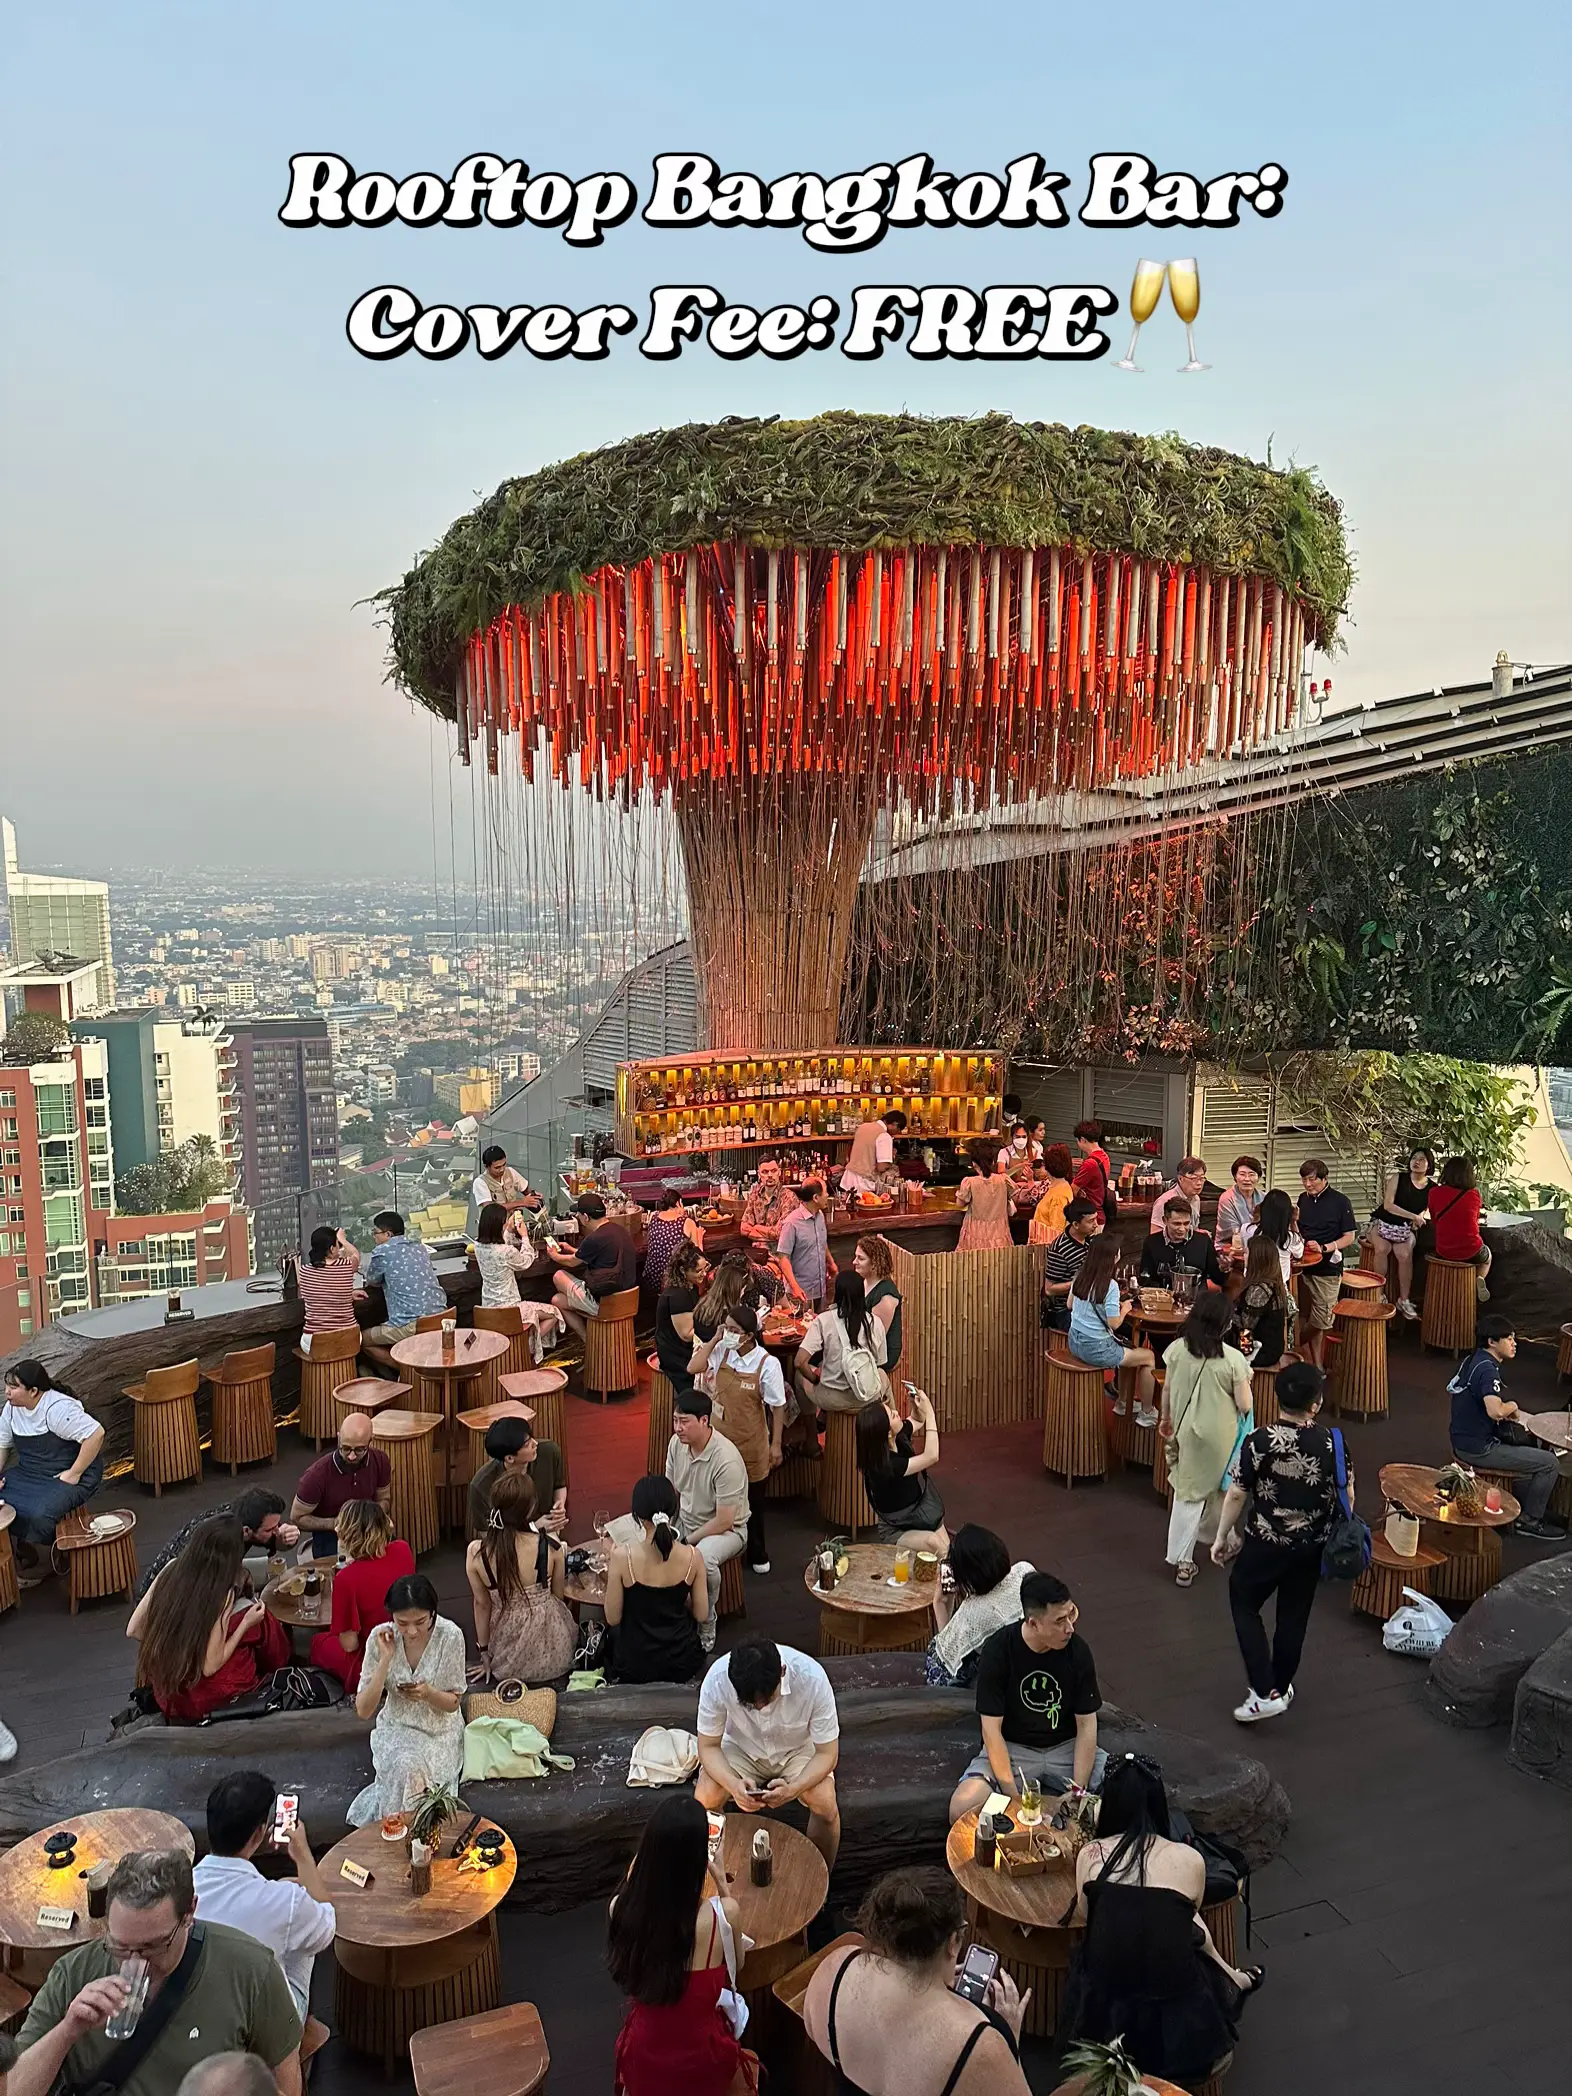  A large group of people are gathered at a rooftop bar. The cover fee is free, and the people are enjoying their time together.